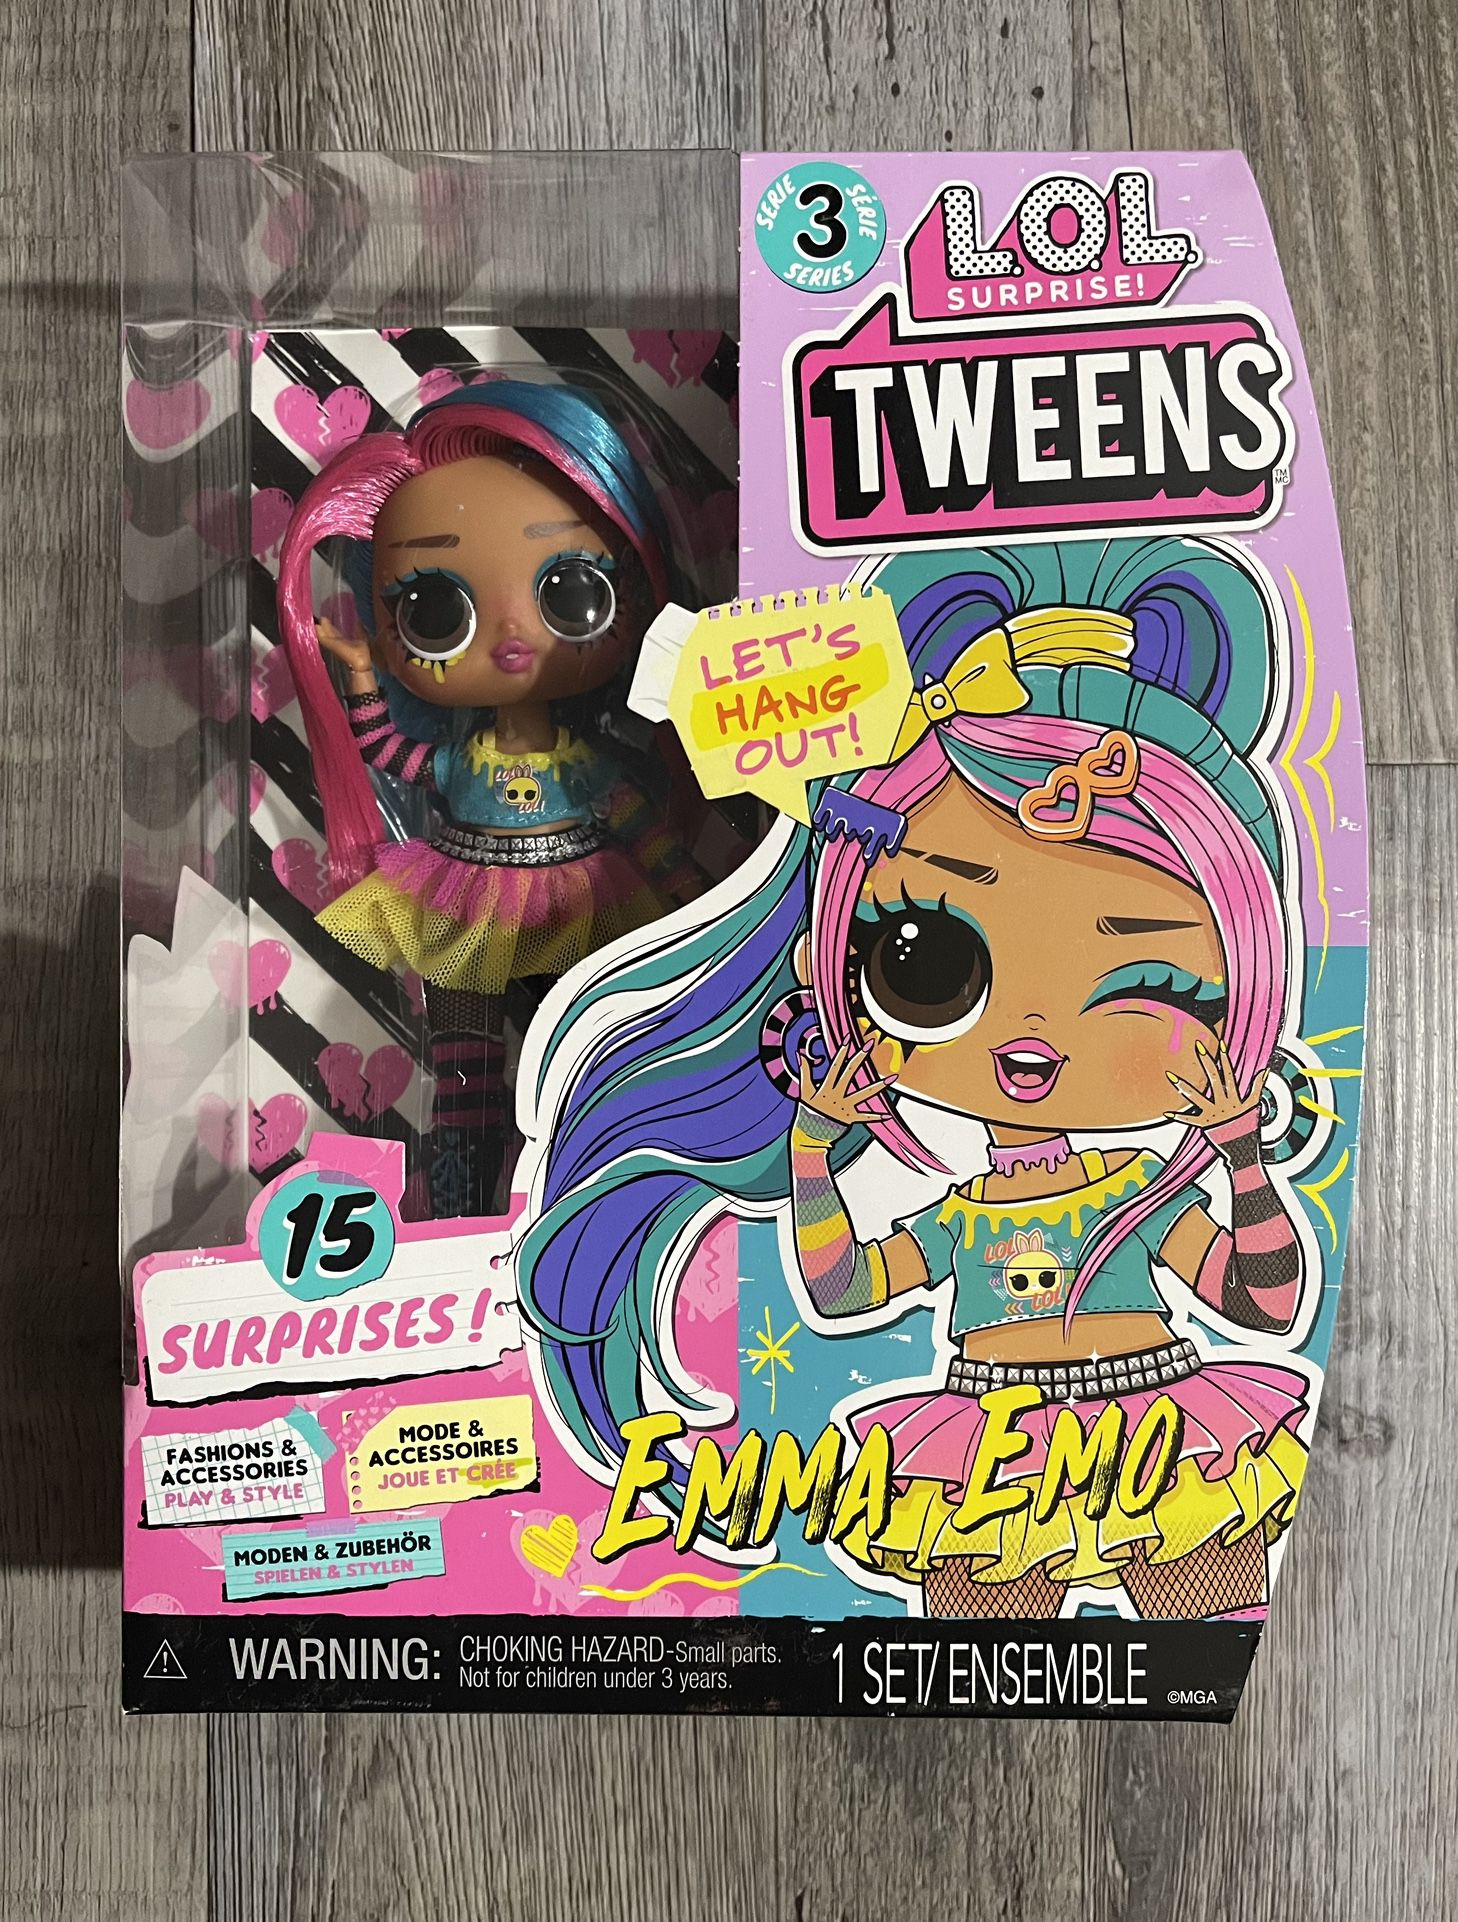 LOL Surprise Tweens Series 3 Emma Emo Fashion Doll with 15 Surprises Including Accessories for Play & Style 